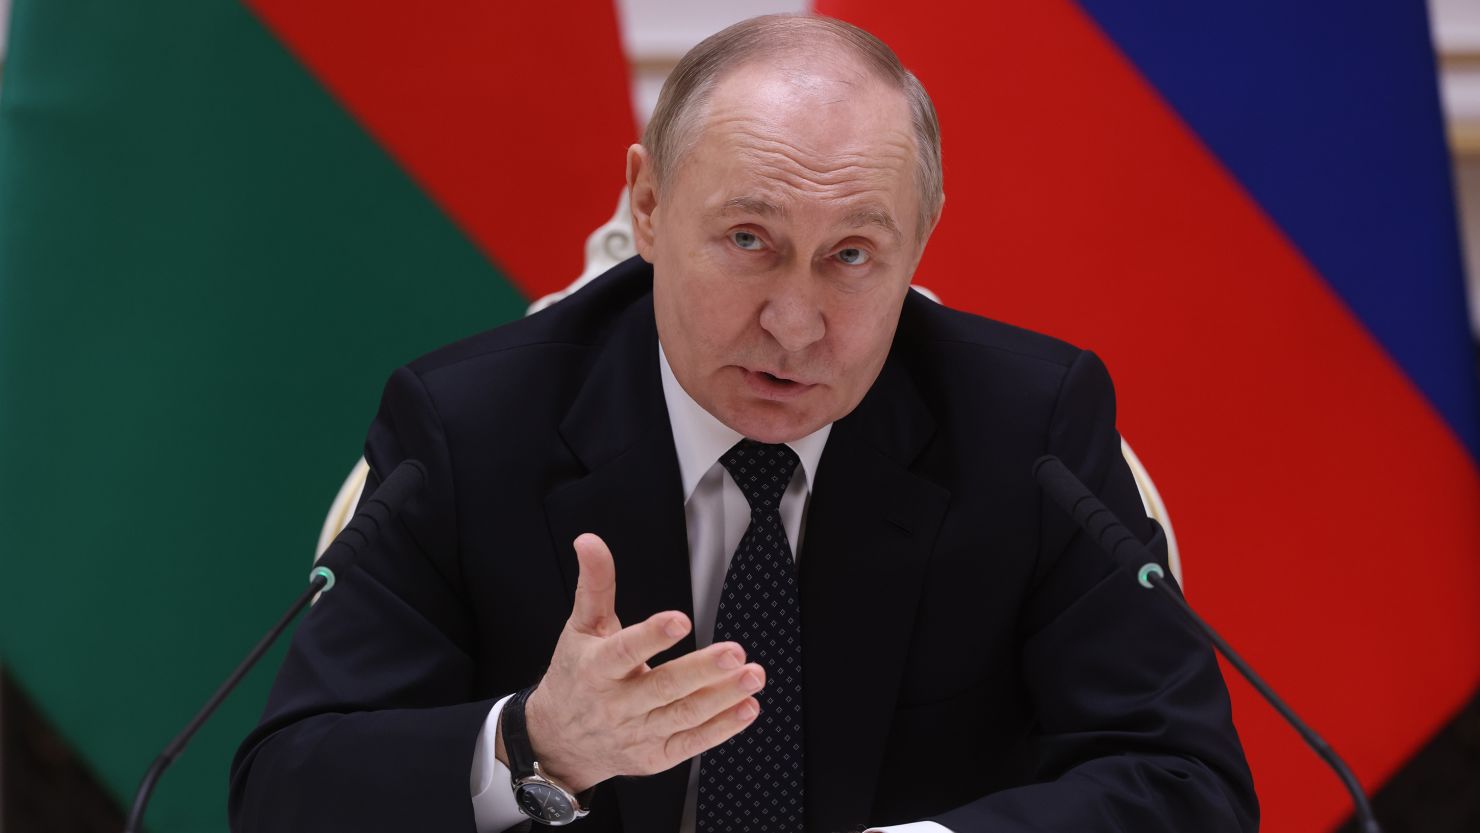 A report by the Reuters news agency has suggested that Russian President Vladimir Putin is “ready to halt the war in Ukraine with a negotiated ceasefire that recognizes the current battlefield lines.”